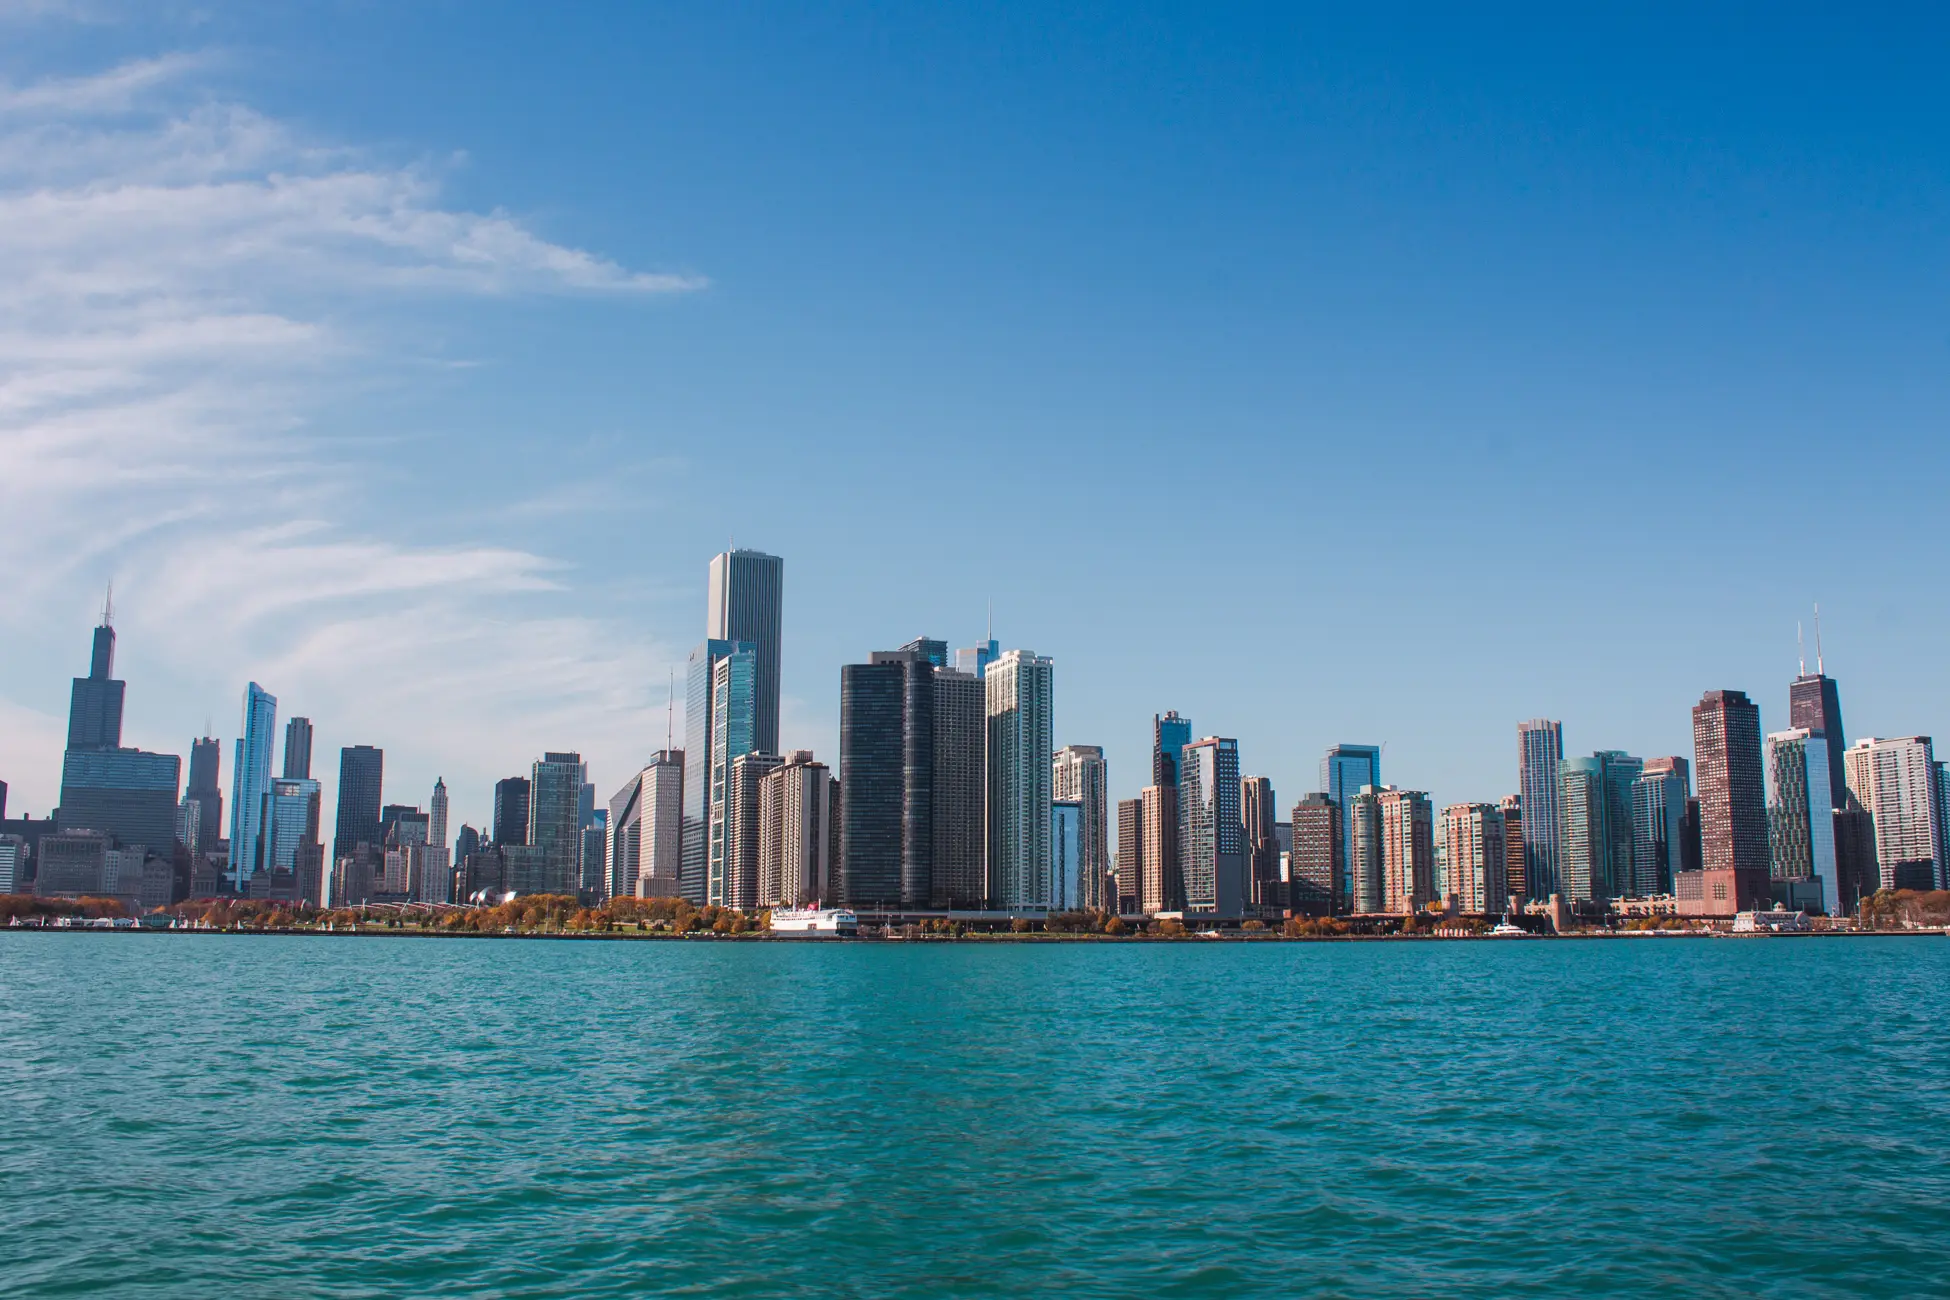 Chicago skyline on a sunny day, one of the best things to do in Chicago on a weekend.